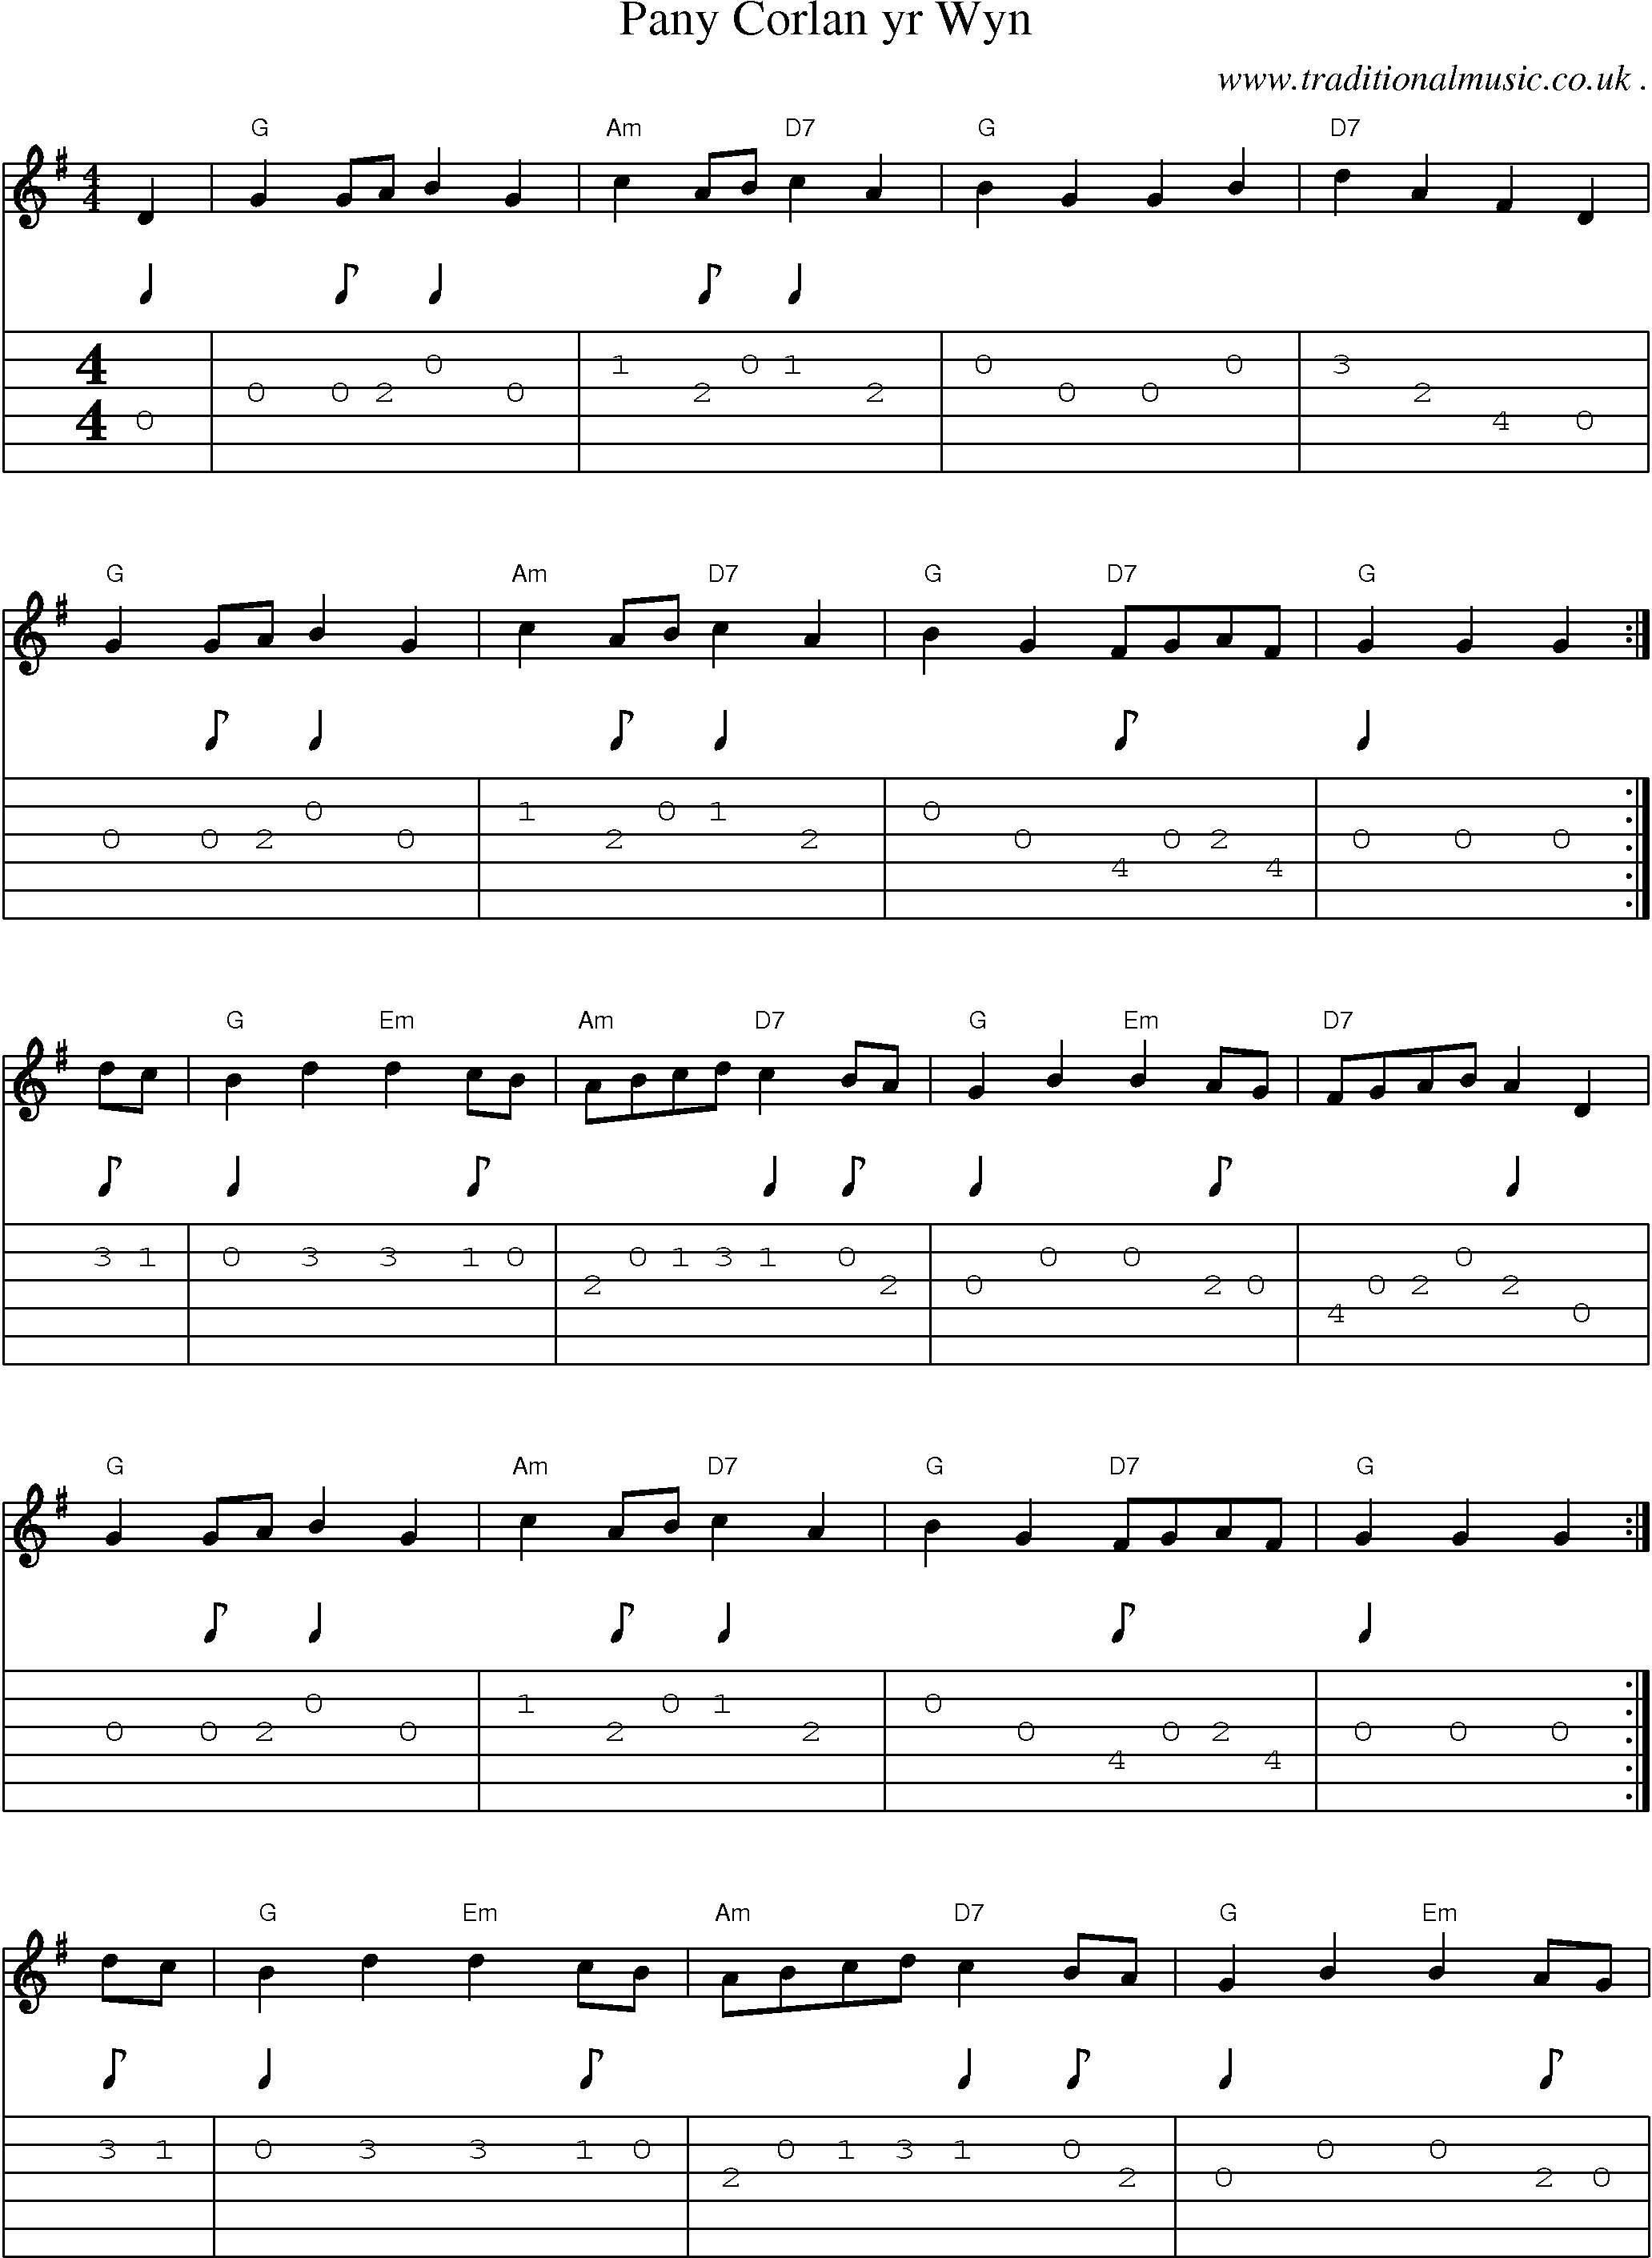 Sheet-Music and Guitar Tabs for Pany Corlan Yr Wyn